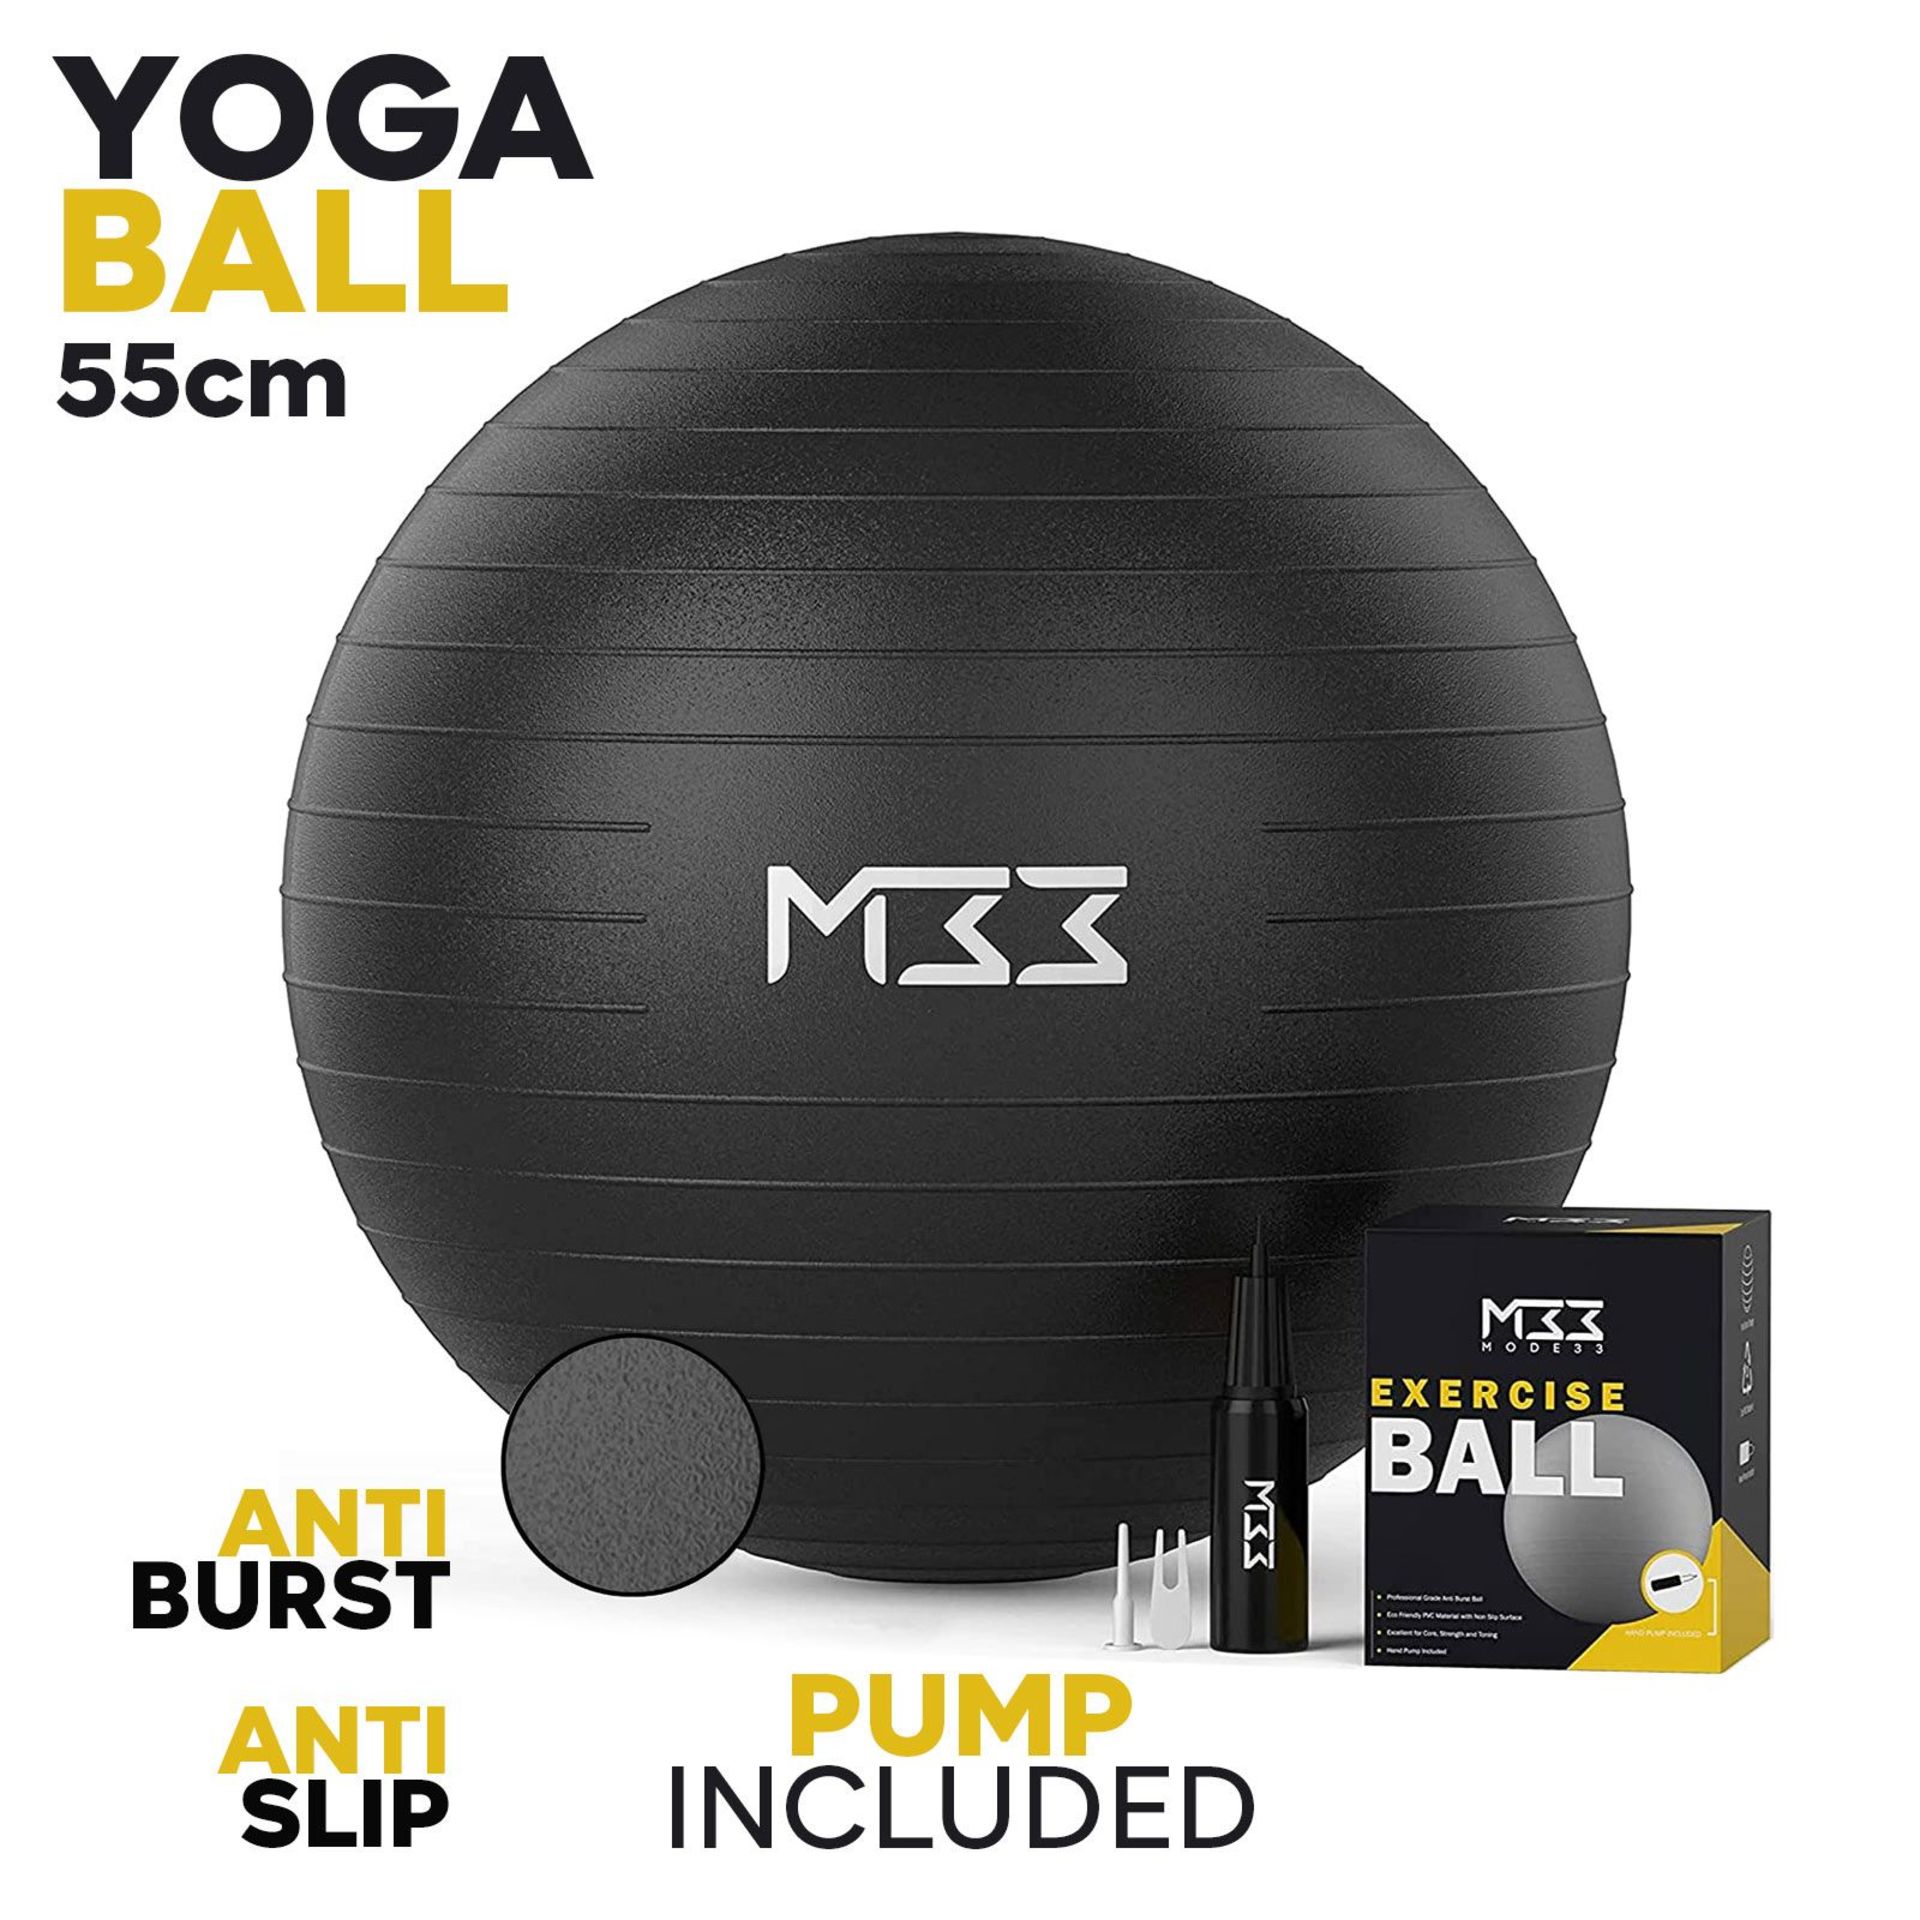 10 x Mode33 Exercise / Yoga / Pregnancy Ball - 55cm (NEW) - RRP £169.90 ! - Image 3 of 11